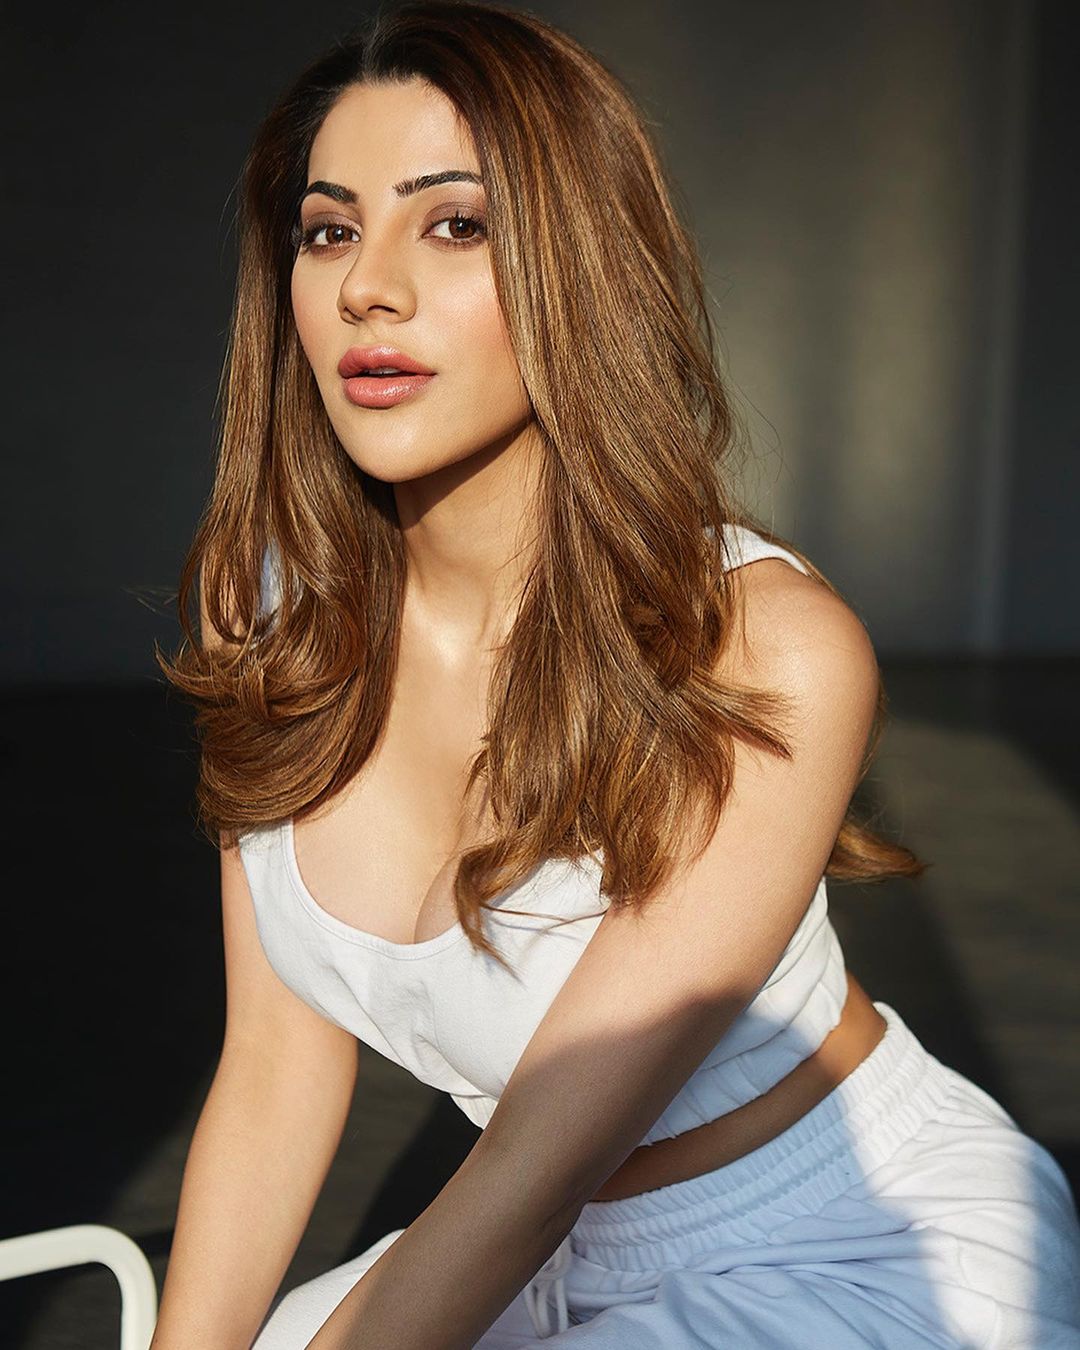 Nikki Tamboli flaunts her cleavage in the sunkissed photo